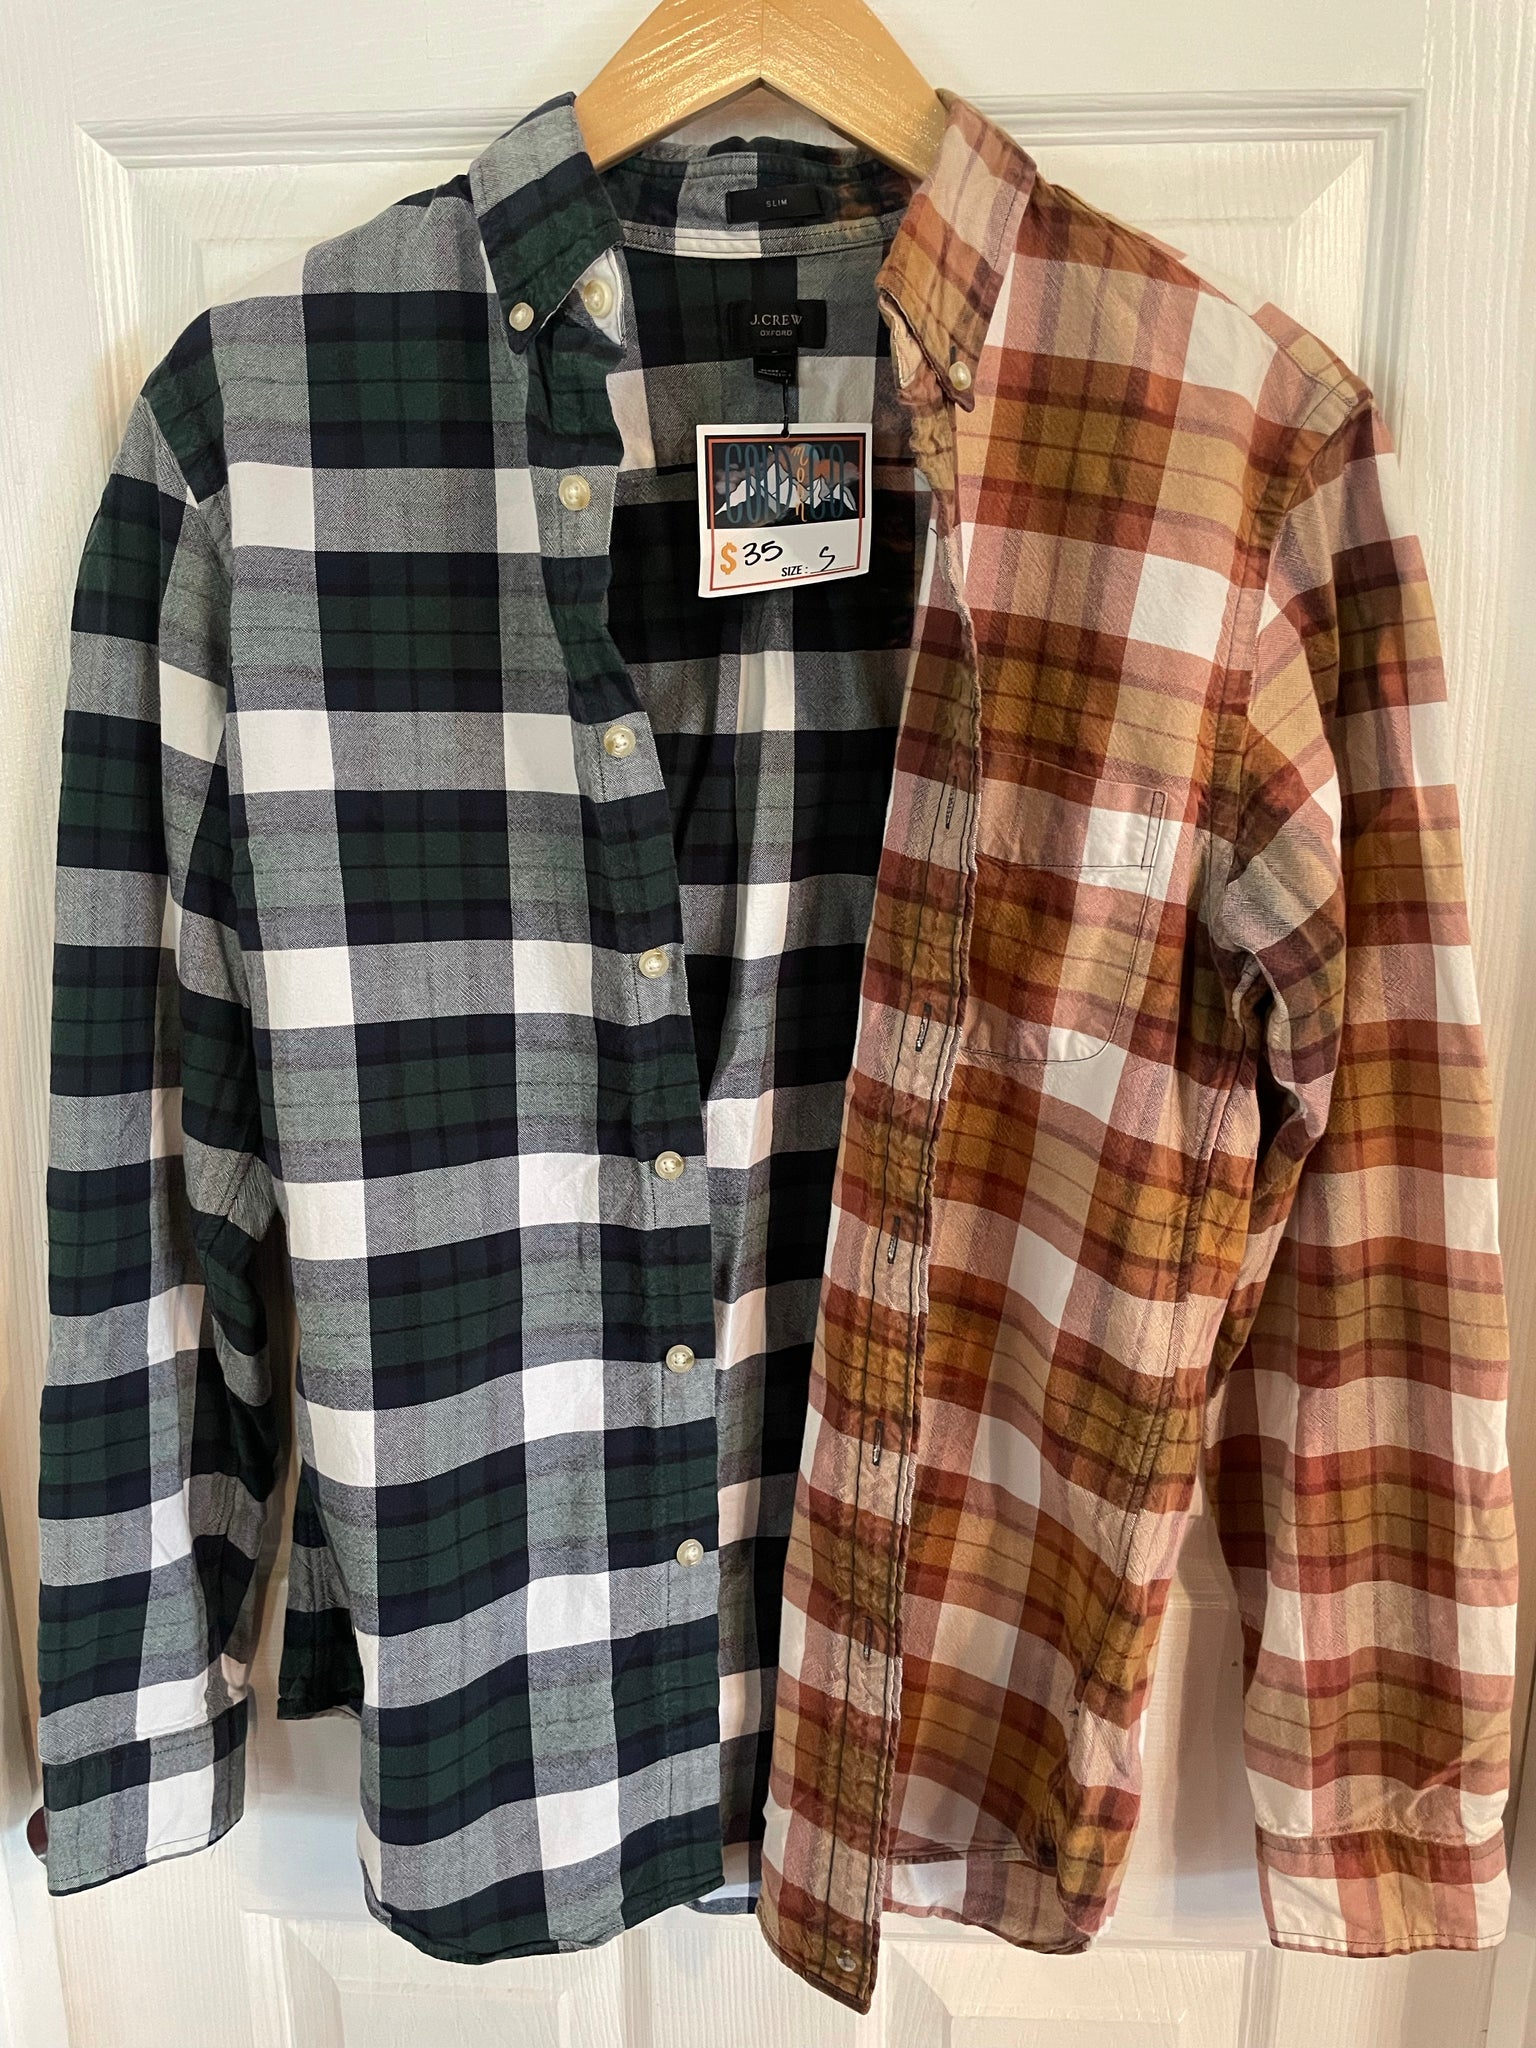 Cold Moon Collective Flannel White/Green/Navy Checkers S